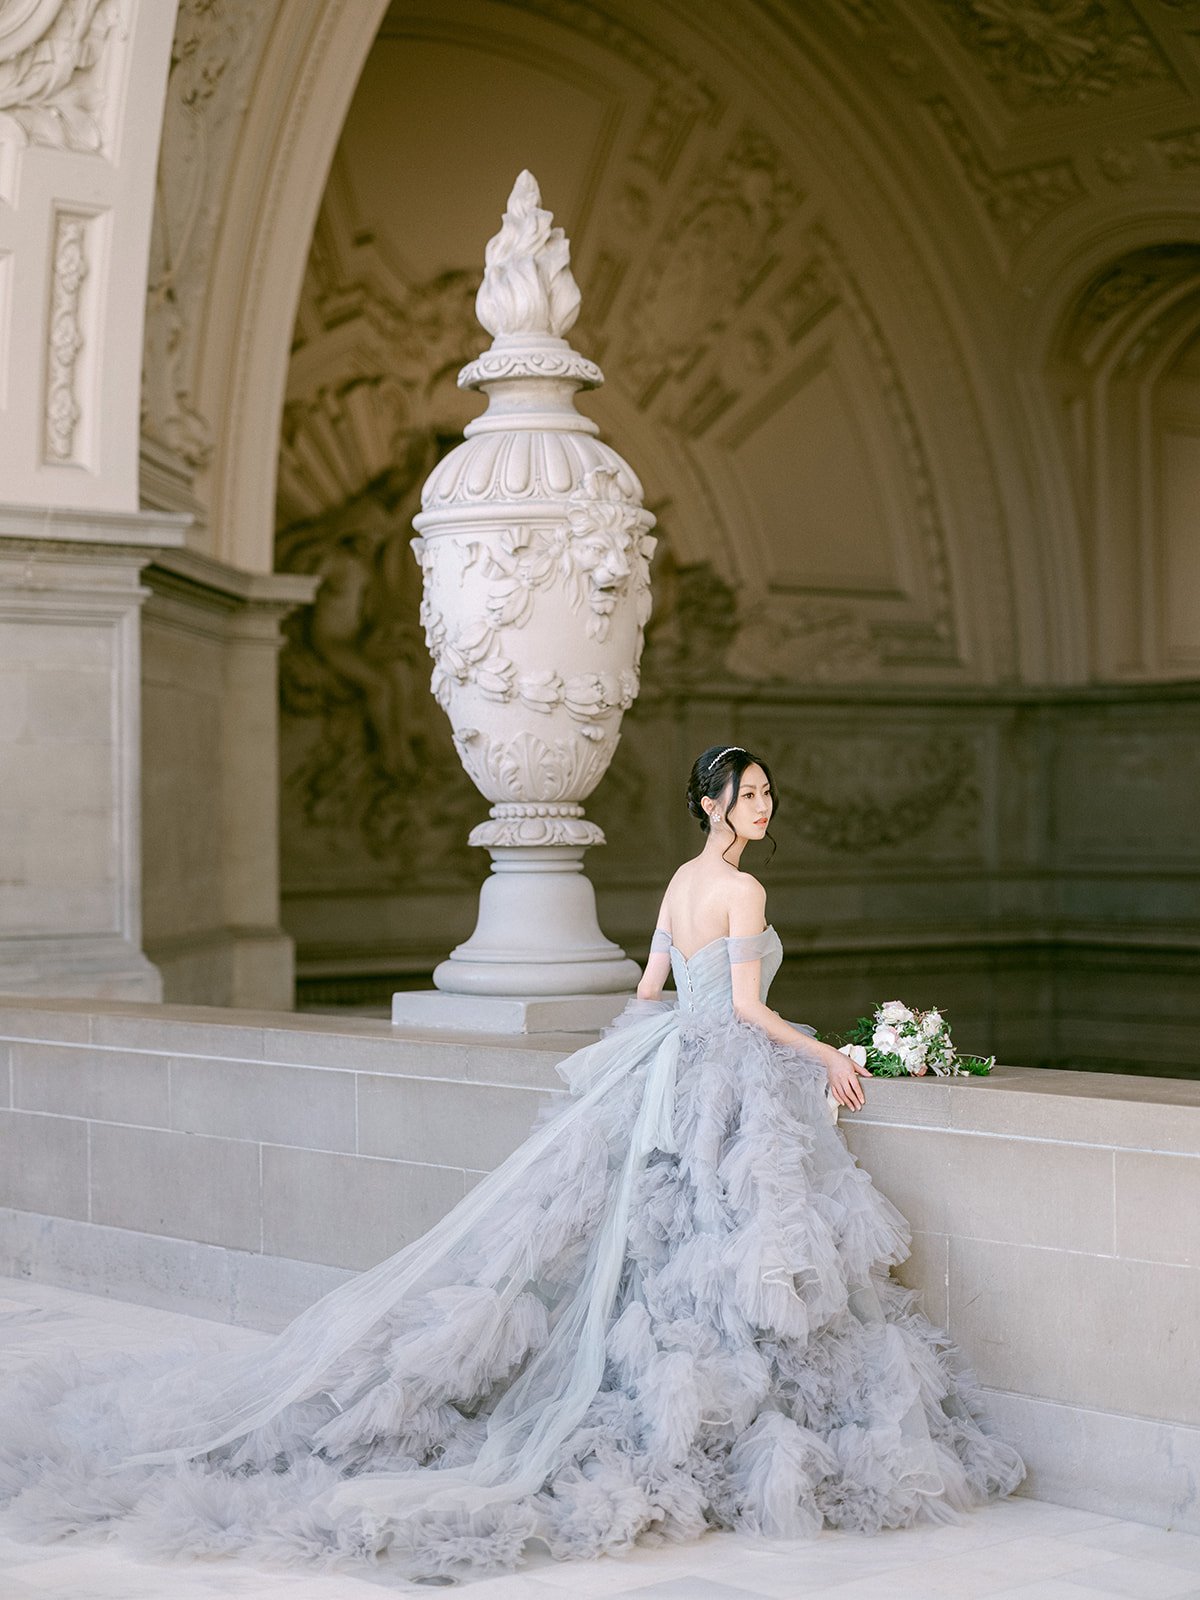 A Most Adorable SF City Hall Wedding: Gracie & Peter (+ Wally & Ginger)